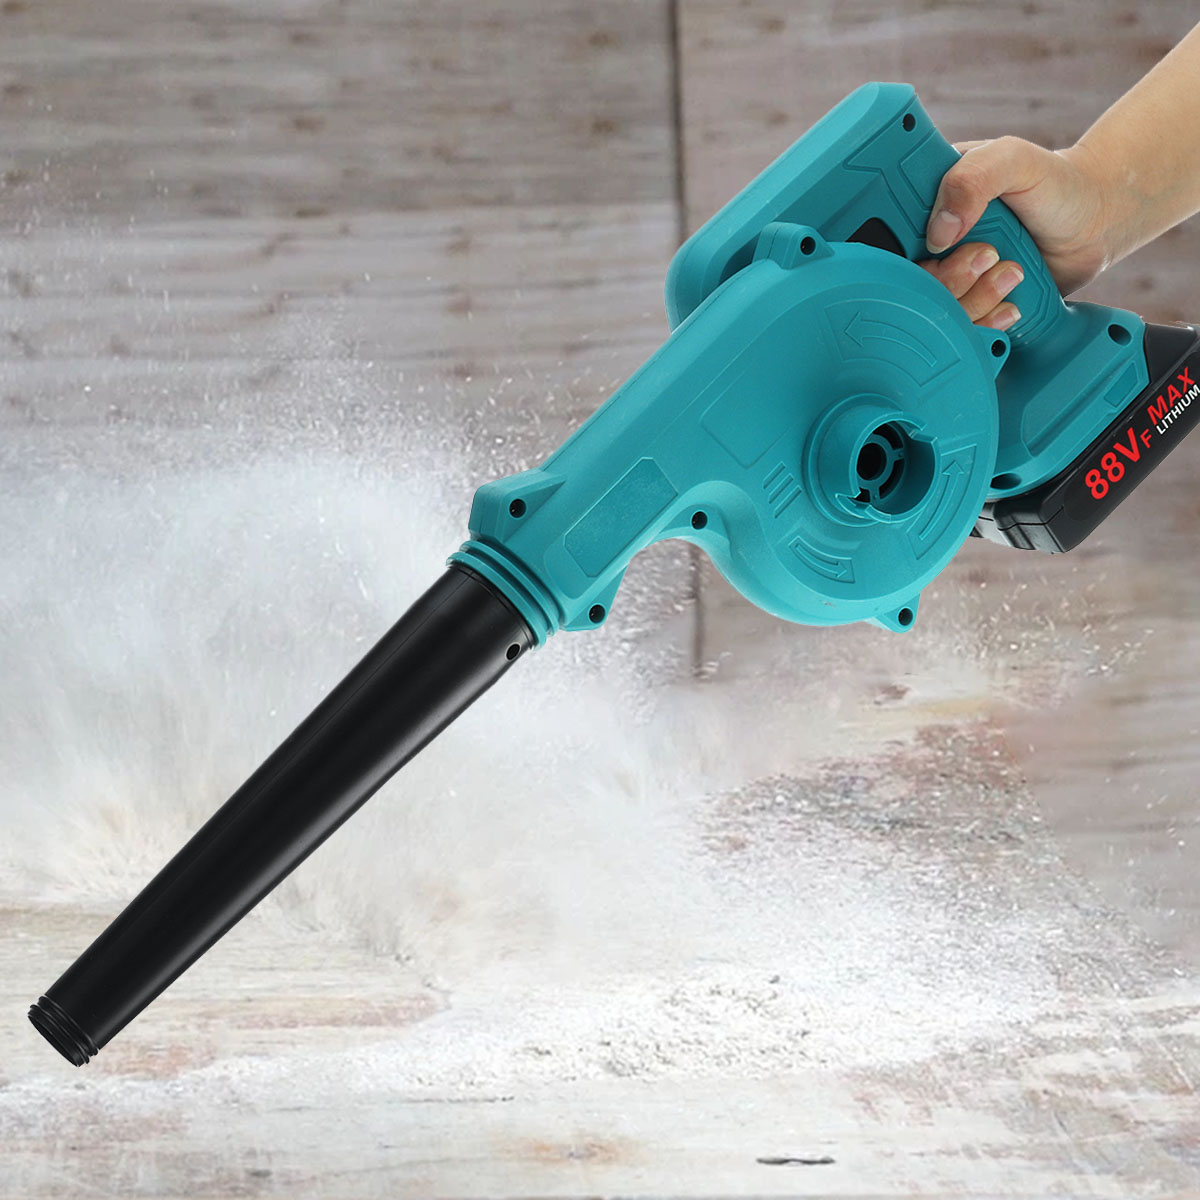 2-IN-1-Cordless-Electric-Air-Blower--Suction-Handheld-Leaf-Computer-Dust-Collector-Cleaner-Power-Too-1851240-8